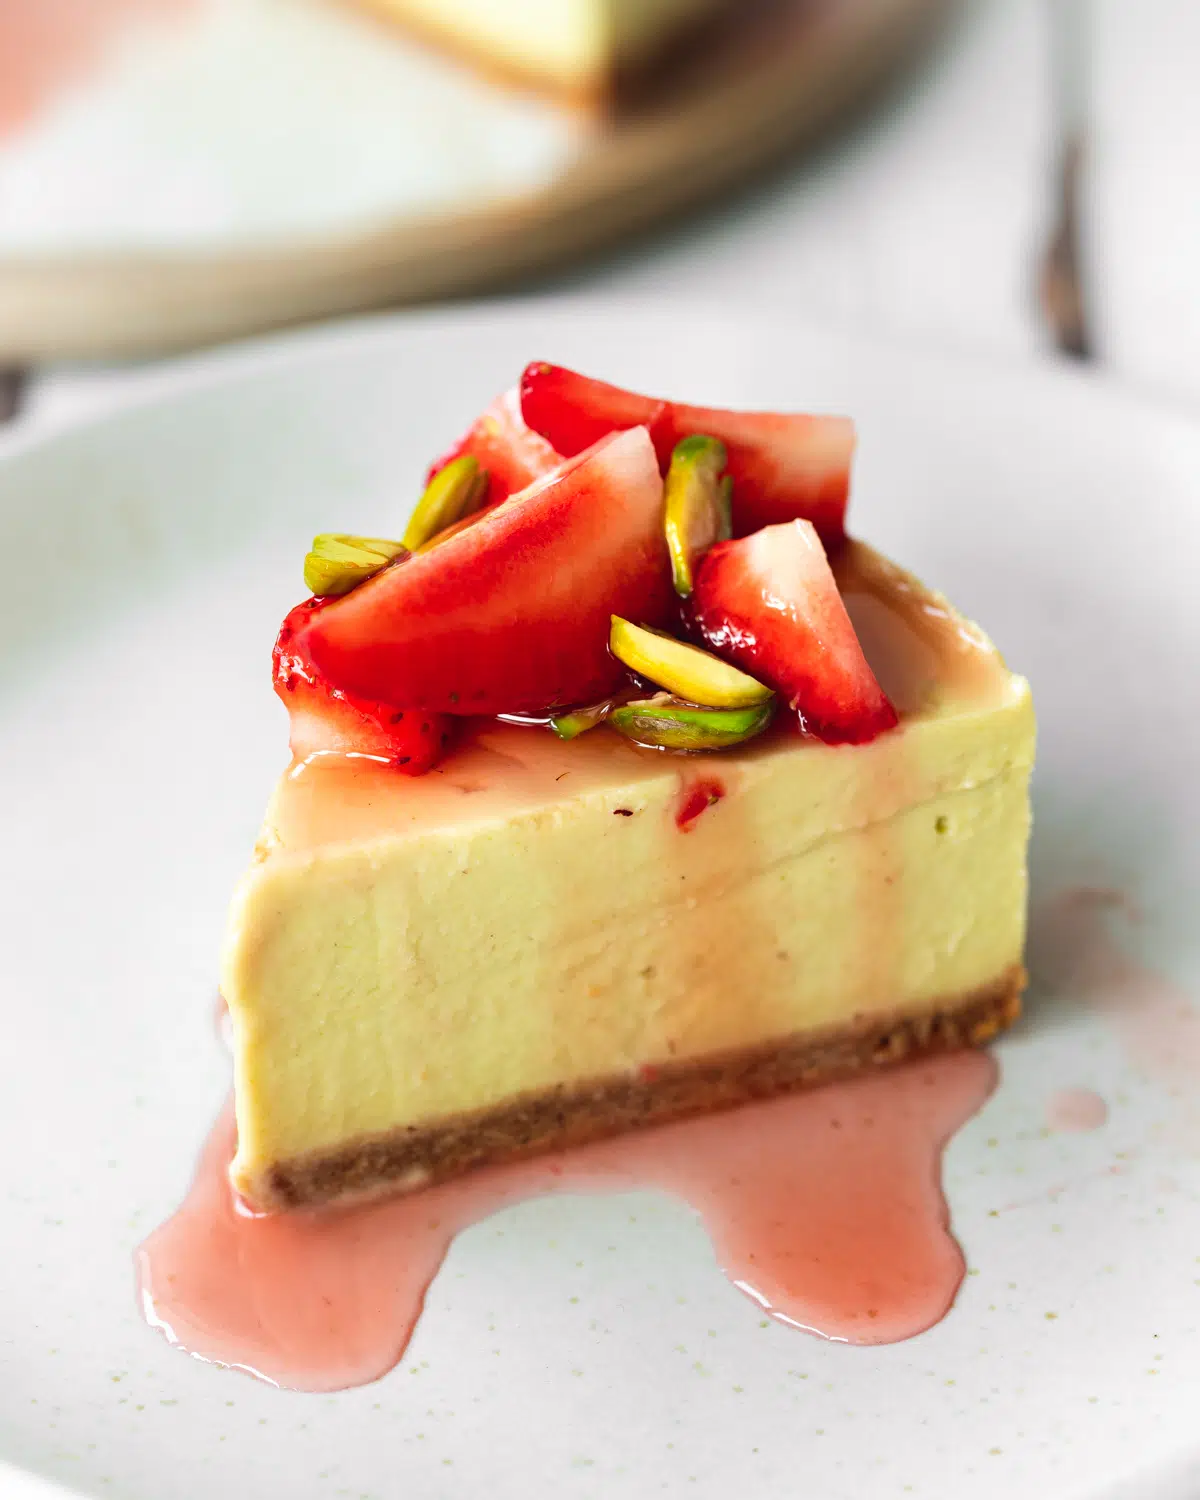 slice of pistachio cheesecake with strawberries and syrup on a grey plate.